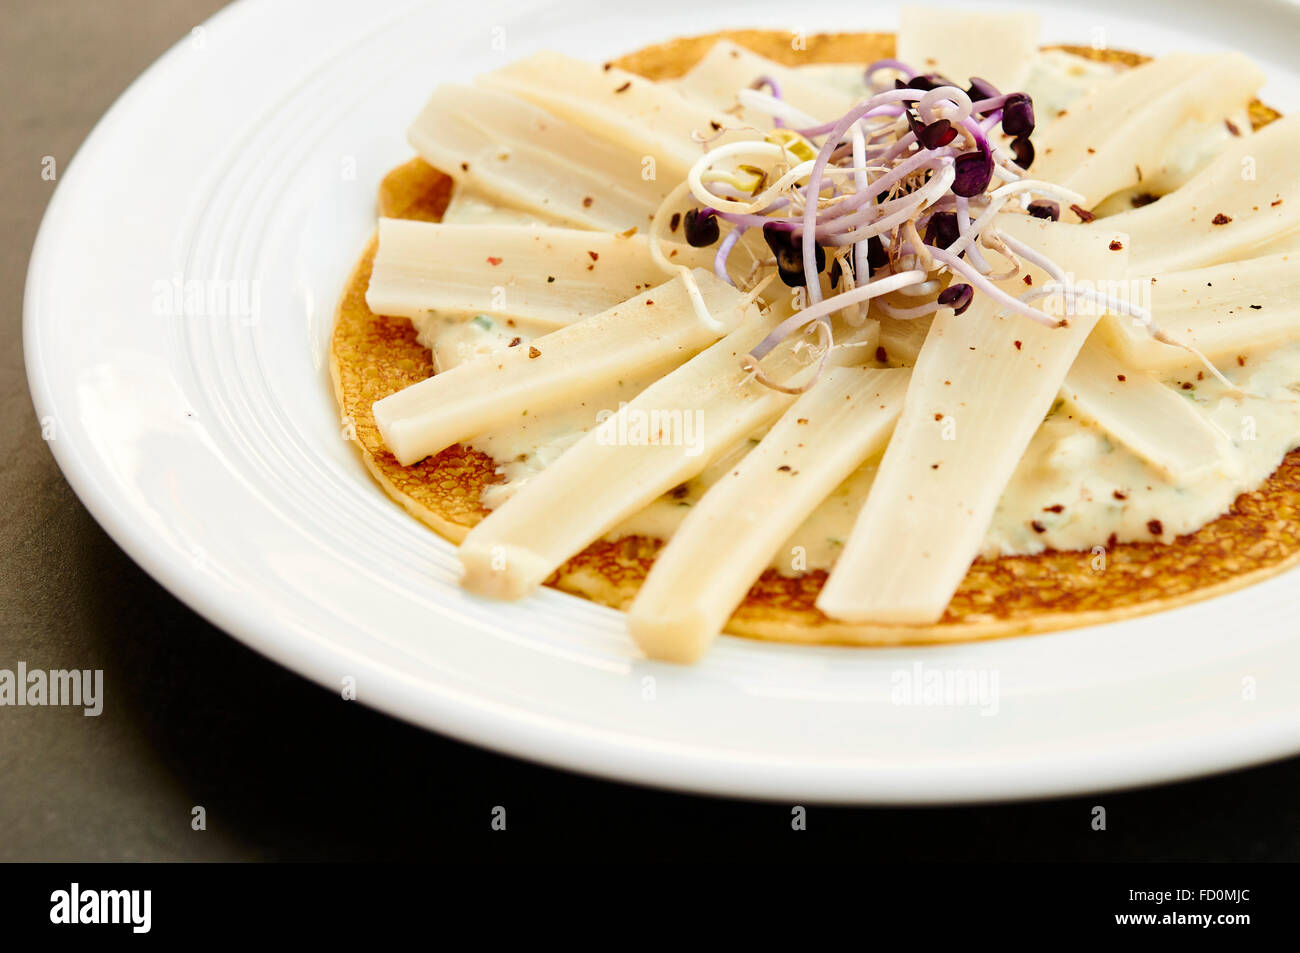 Plate with black salsify with radish sprouts on a crepe. Stock Photo